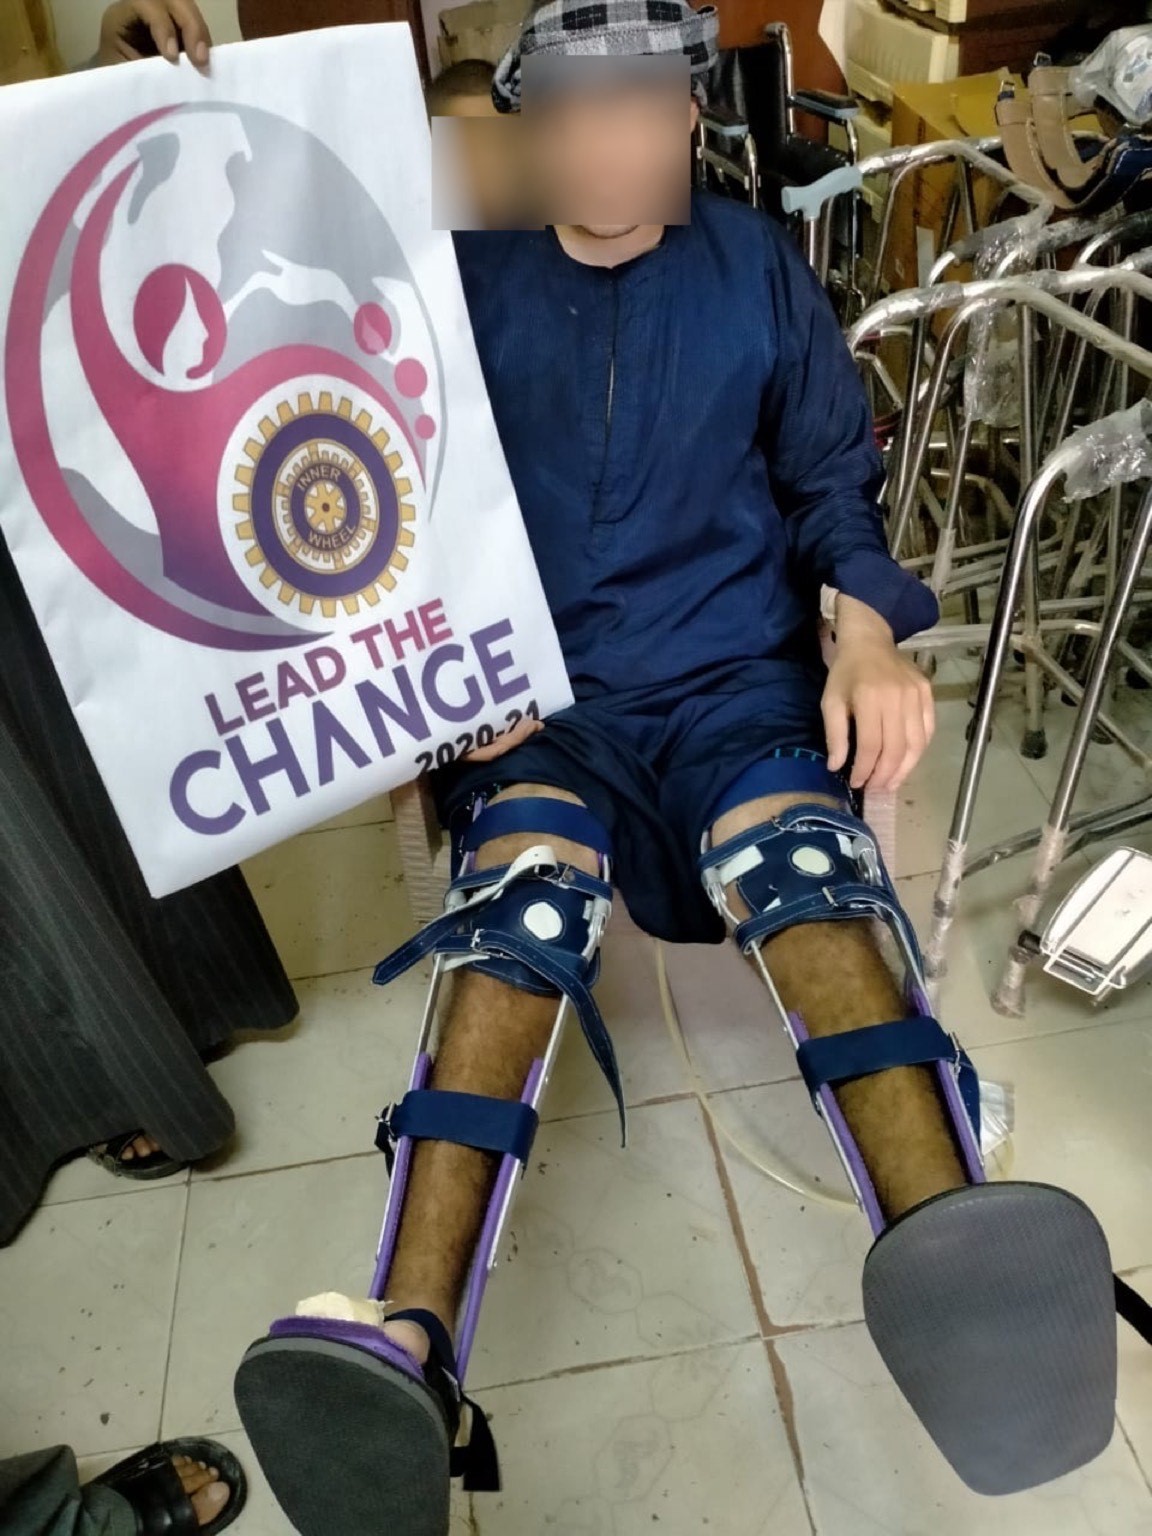 The motor prosthetic device given by IWC of El Minya